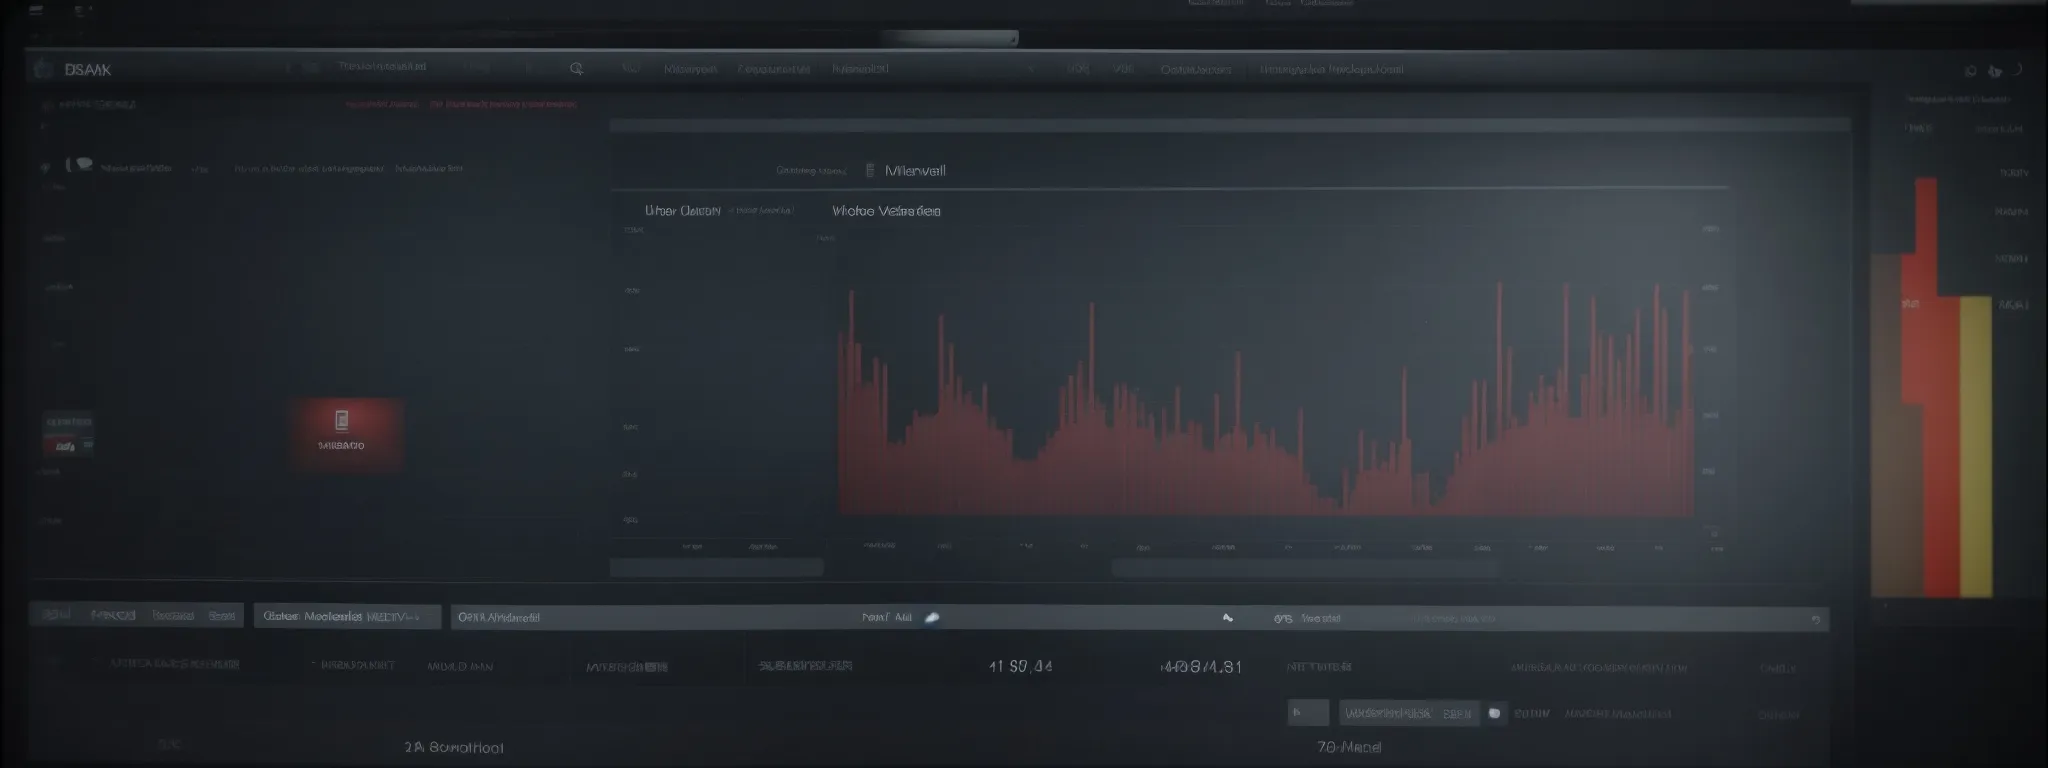 a computer screen displaying graphs of trending keywords alongside a video upload interface.